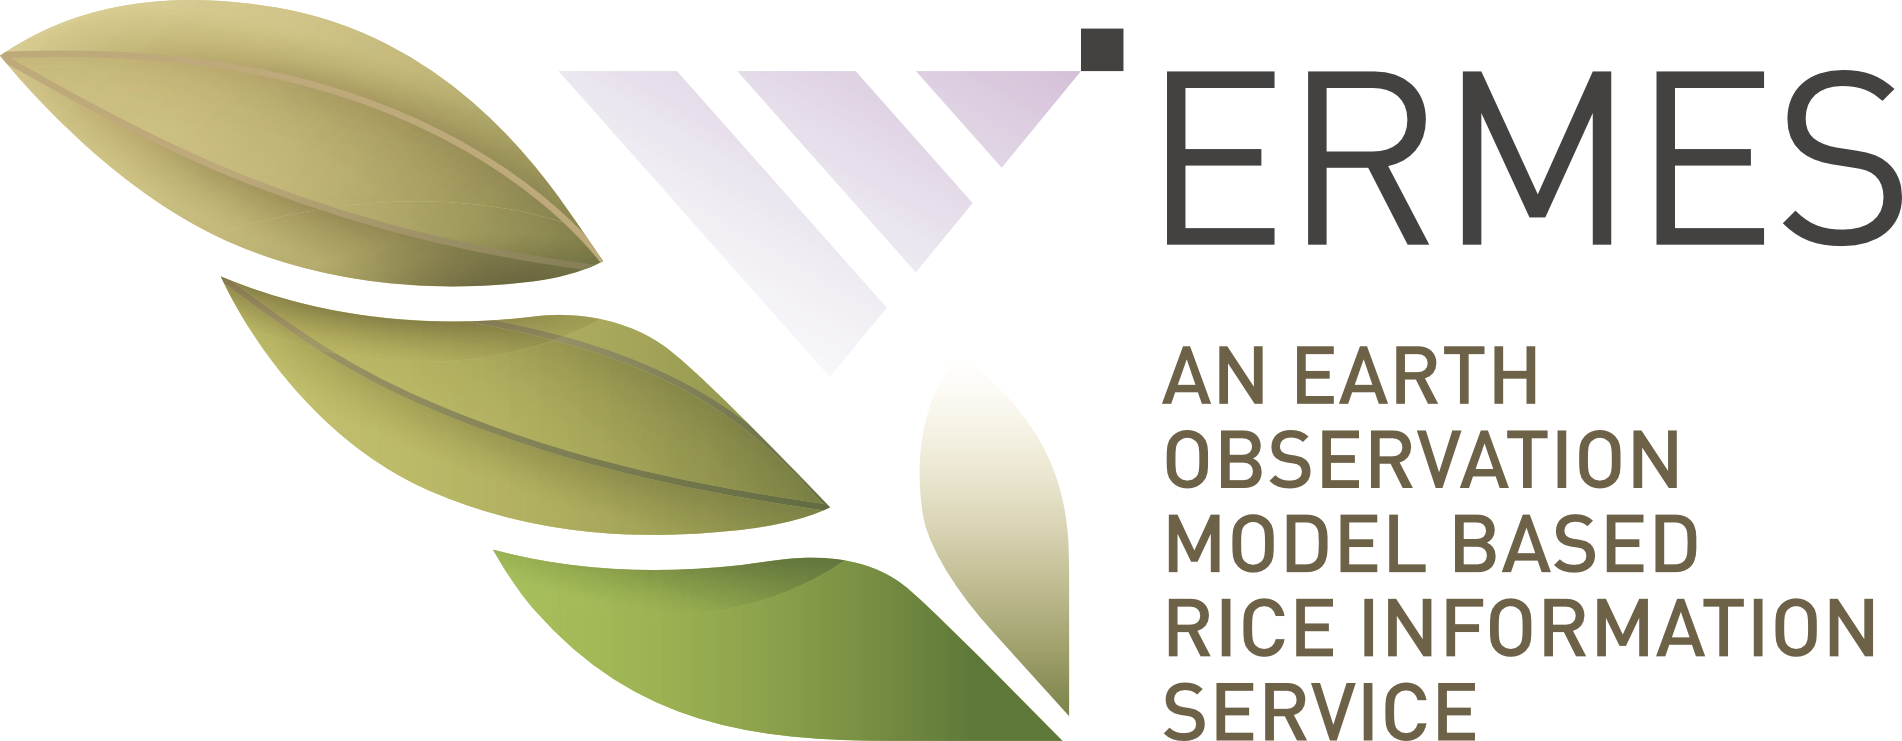 Online il sito del progetto ERMES: an Earth observation model based rice information service